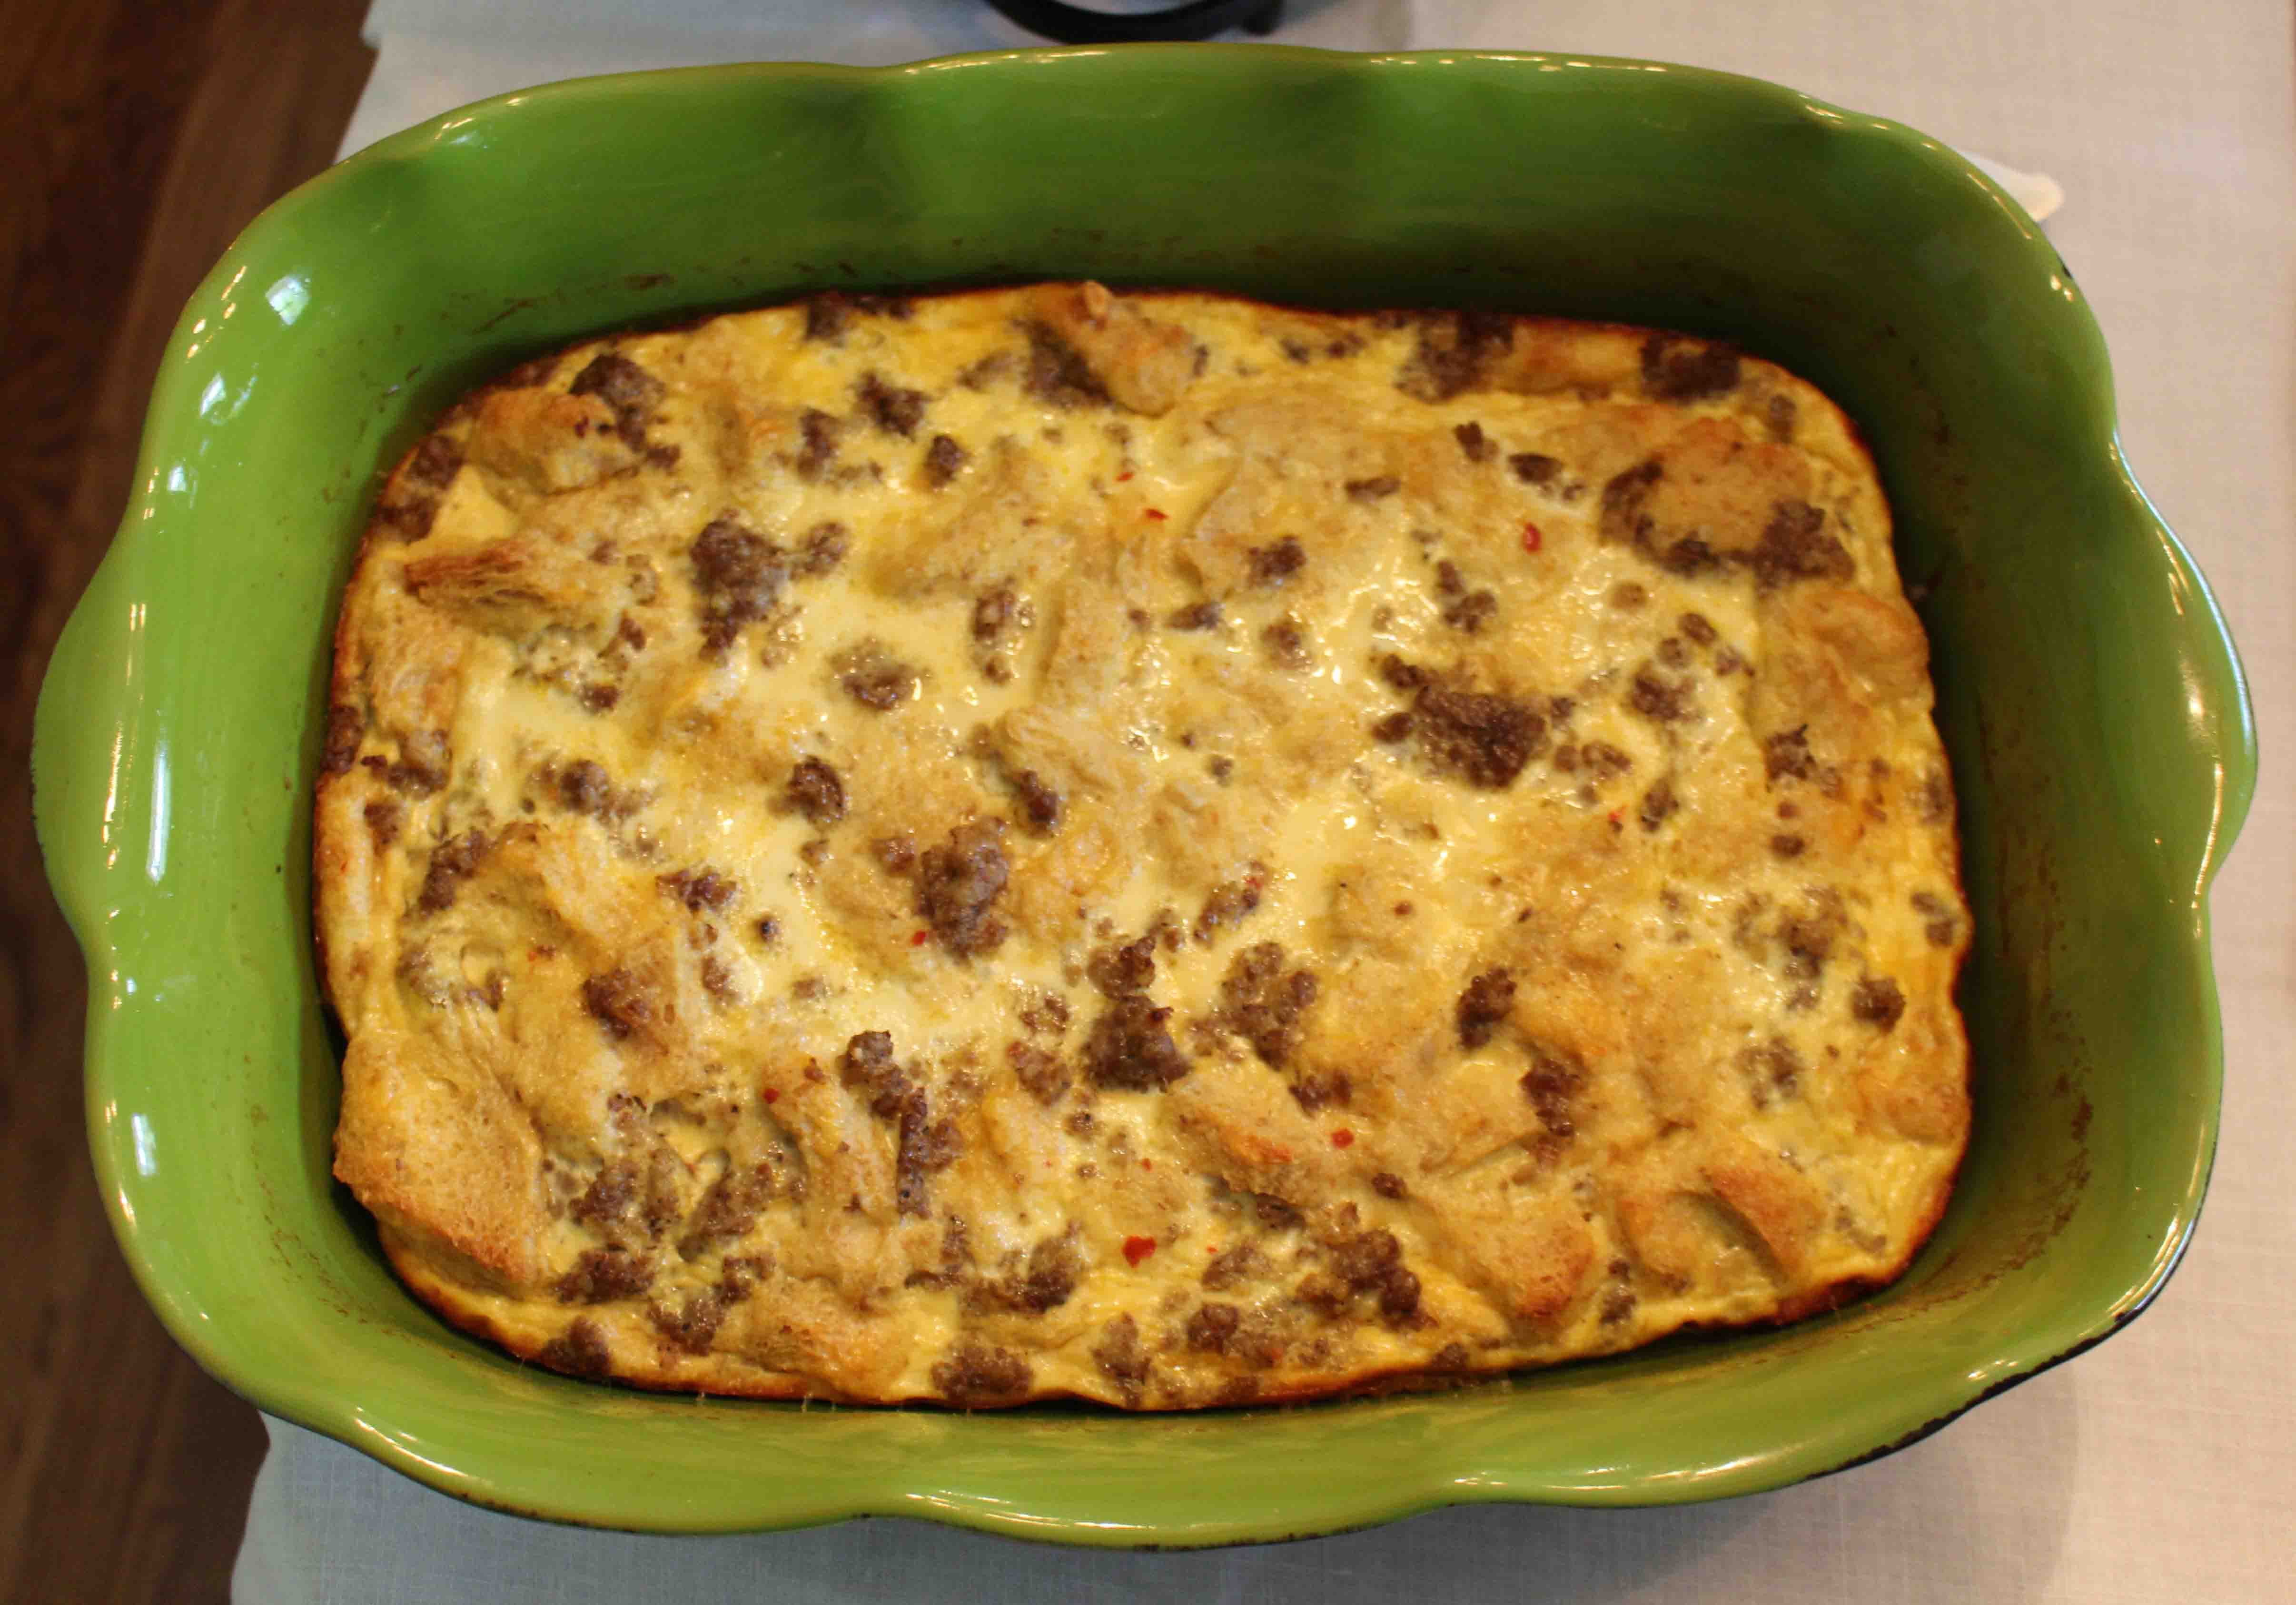 Make this sausage egg casserole the night before, so all you have to do is bake and you've got gourmet breakfast!